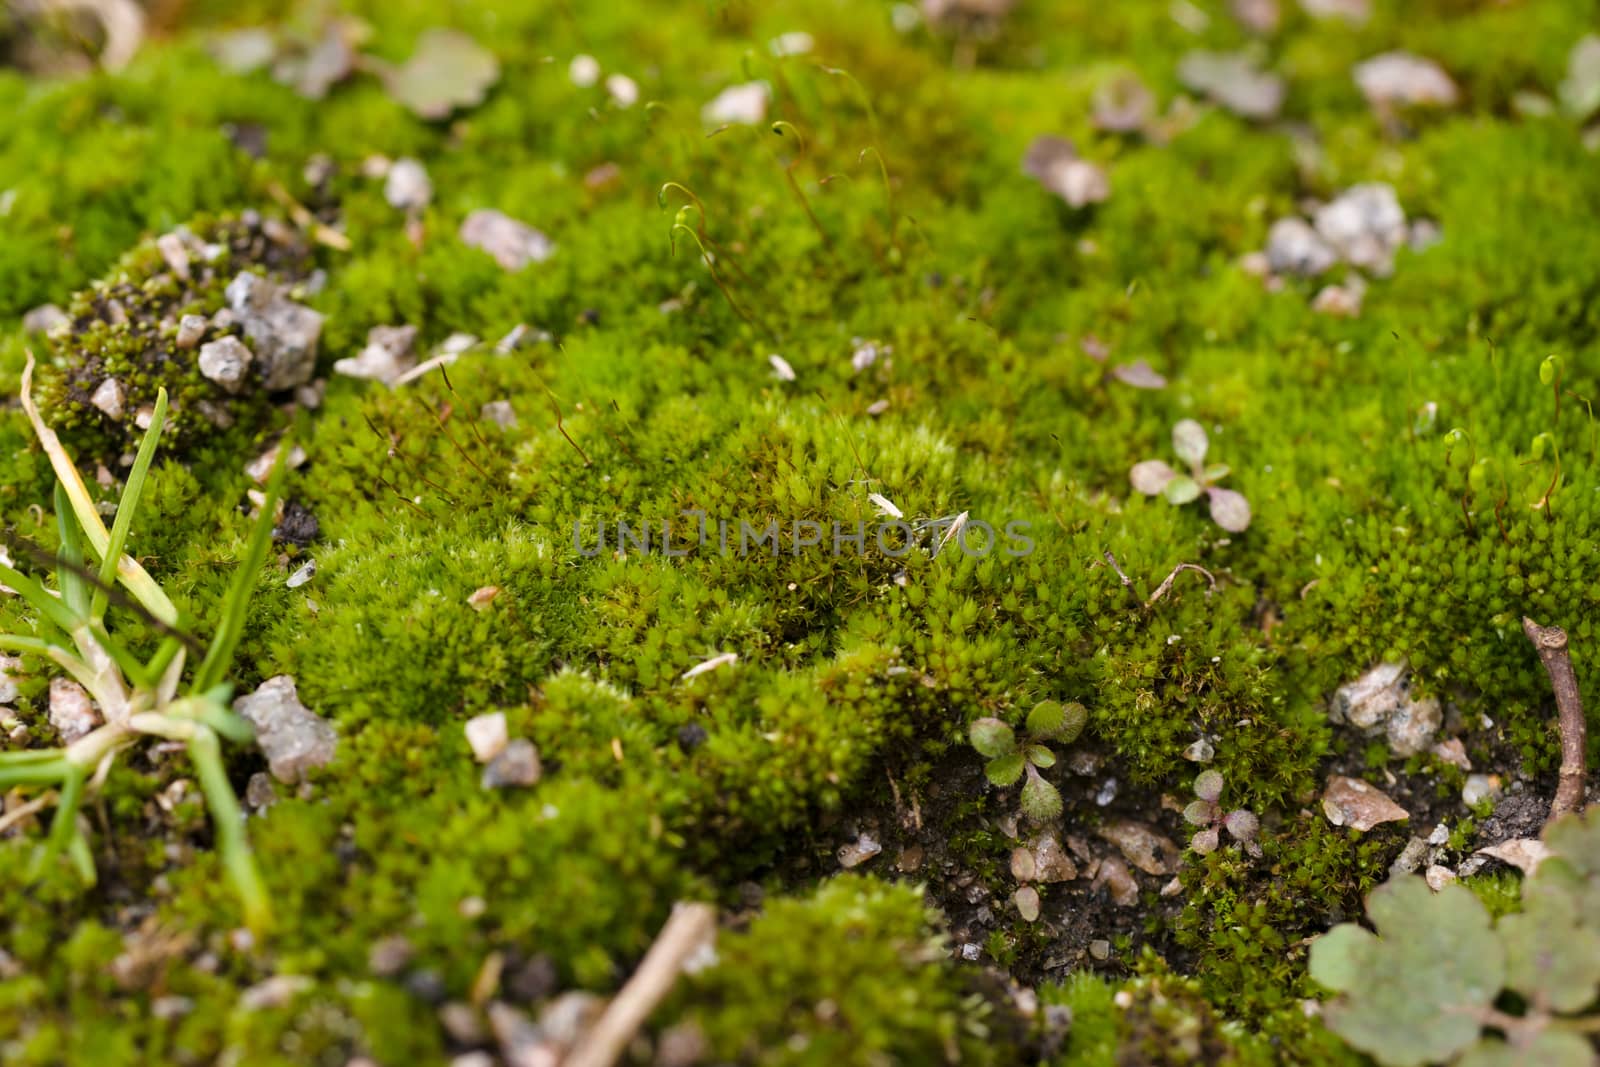 Fresh green and yellow moss with blurred background. Close up view with a small depth of field far away. Stock photography of forest green and yellow moss